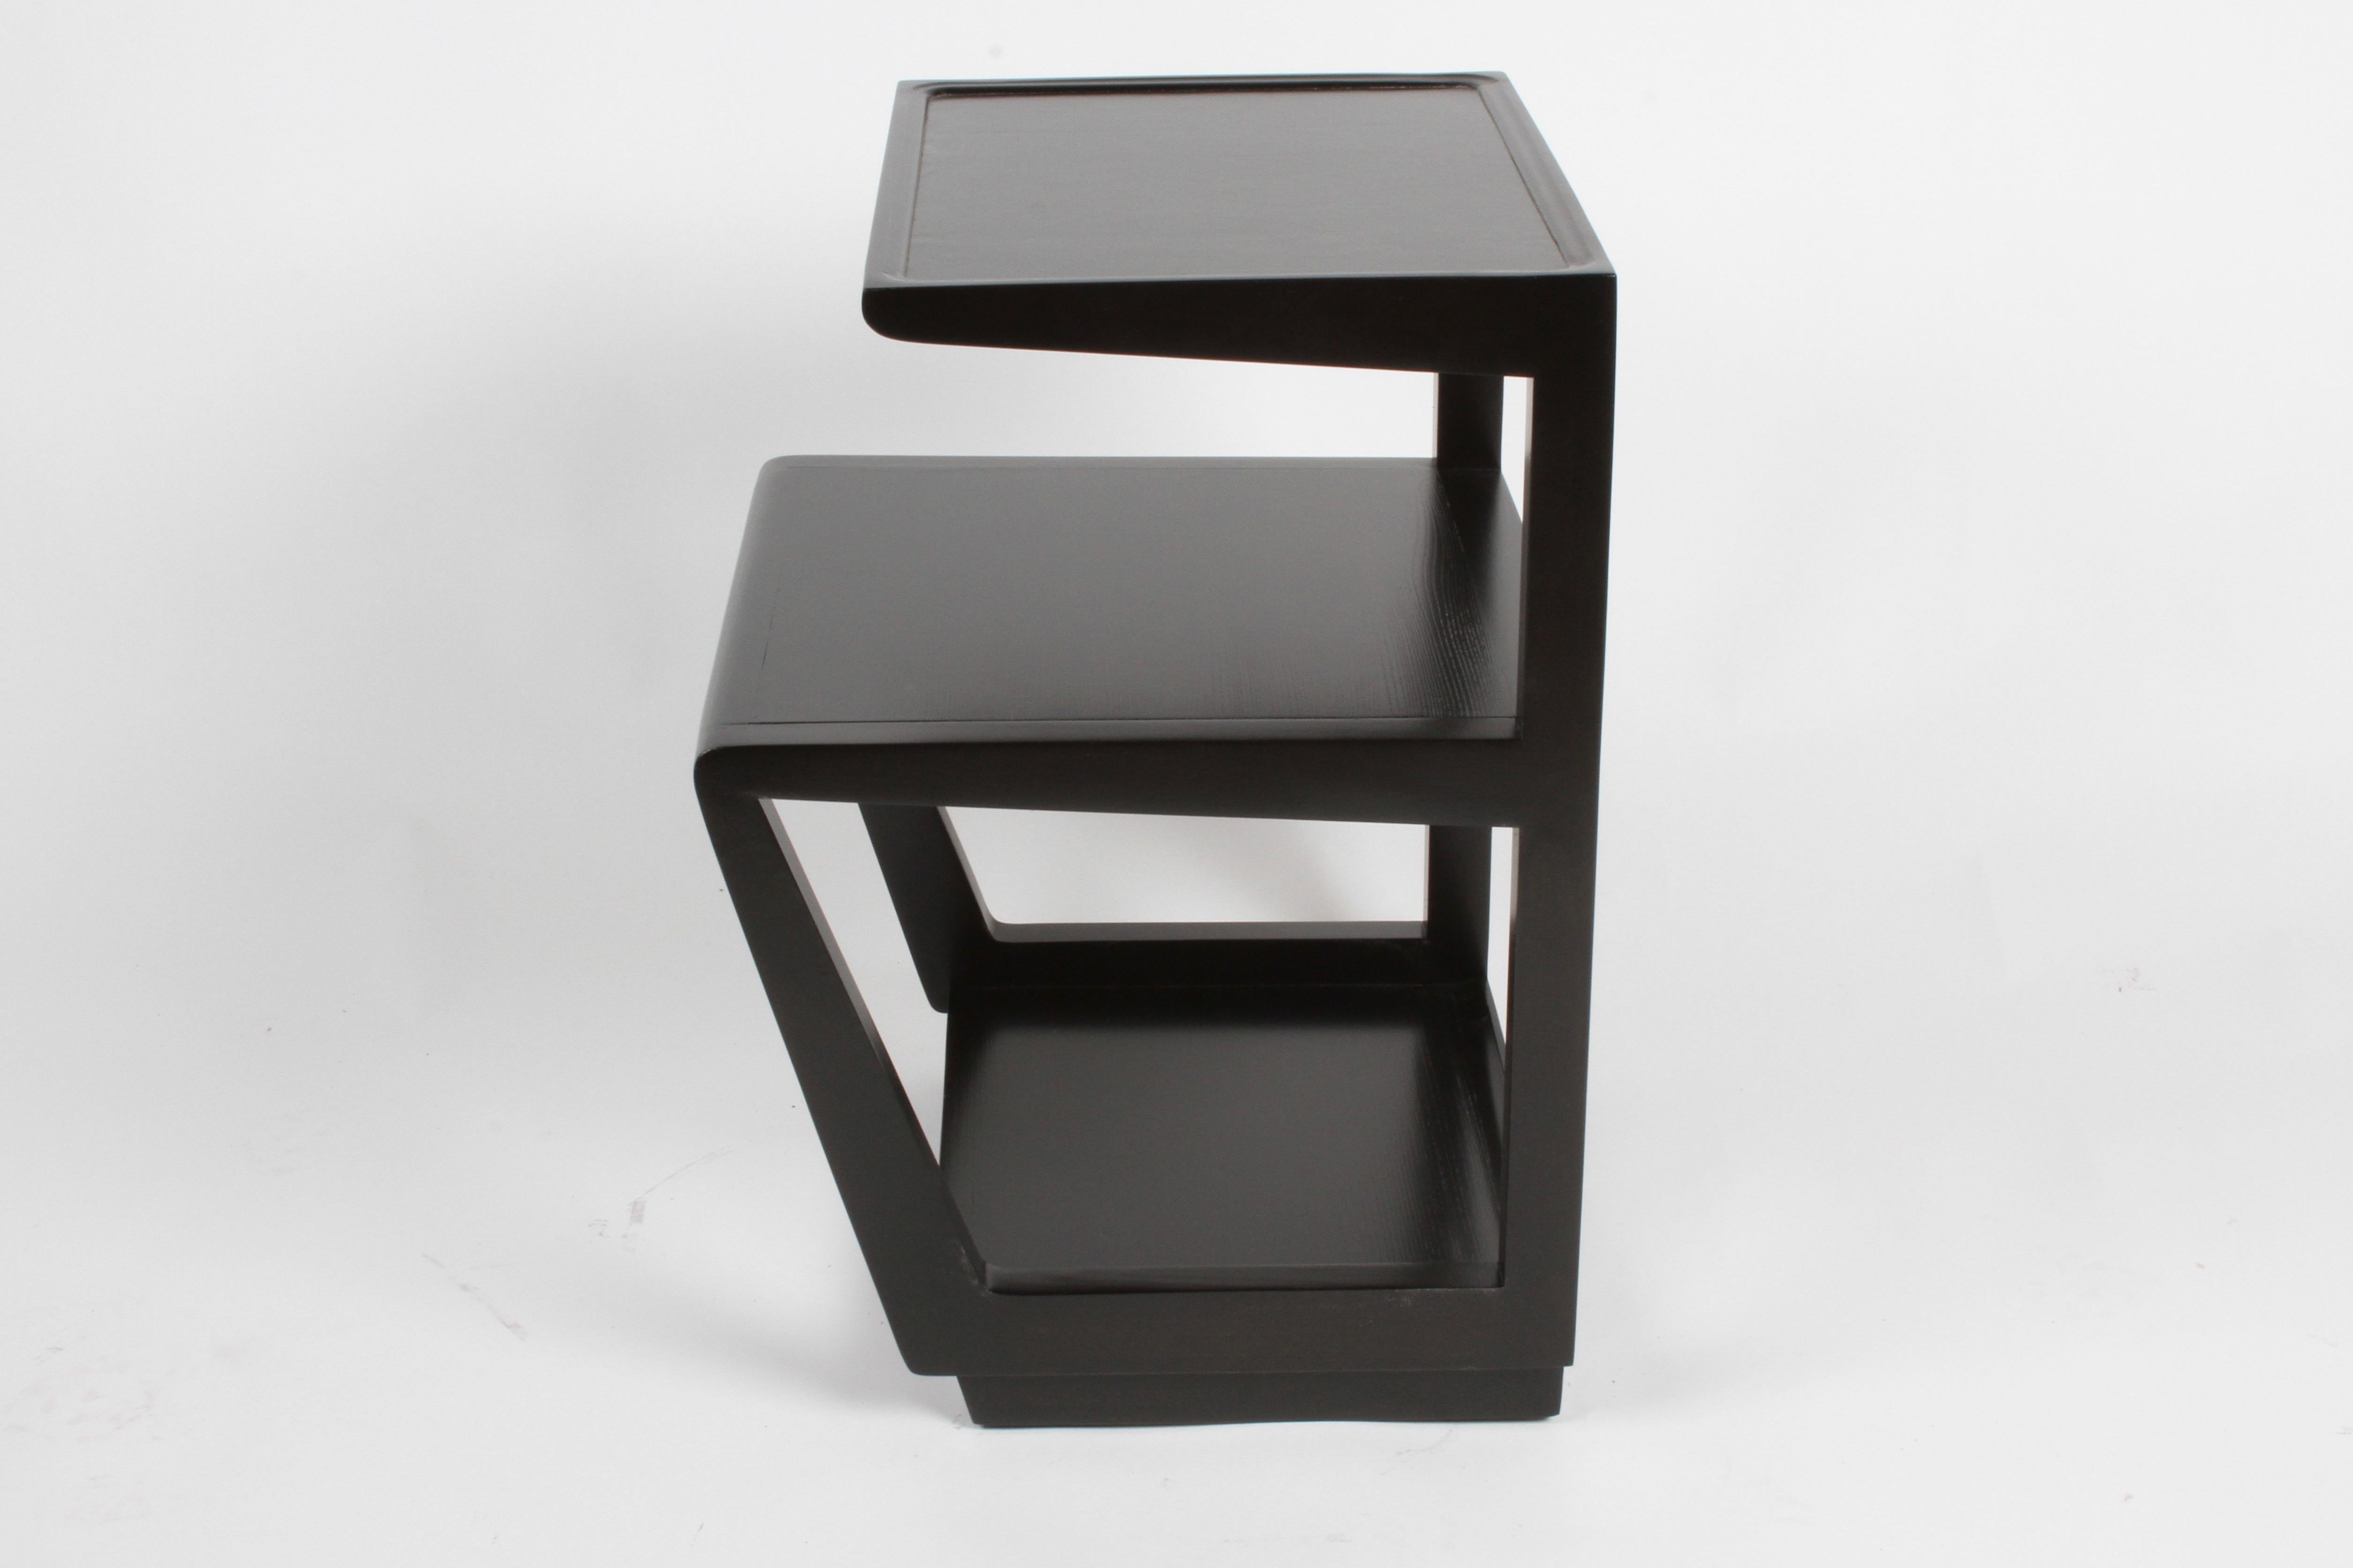 Leather Pair of Edward Wormley 3-Tiered Tables, Precedent Collection in Dark Espresso